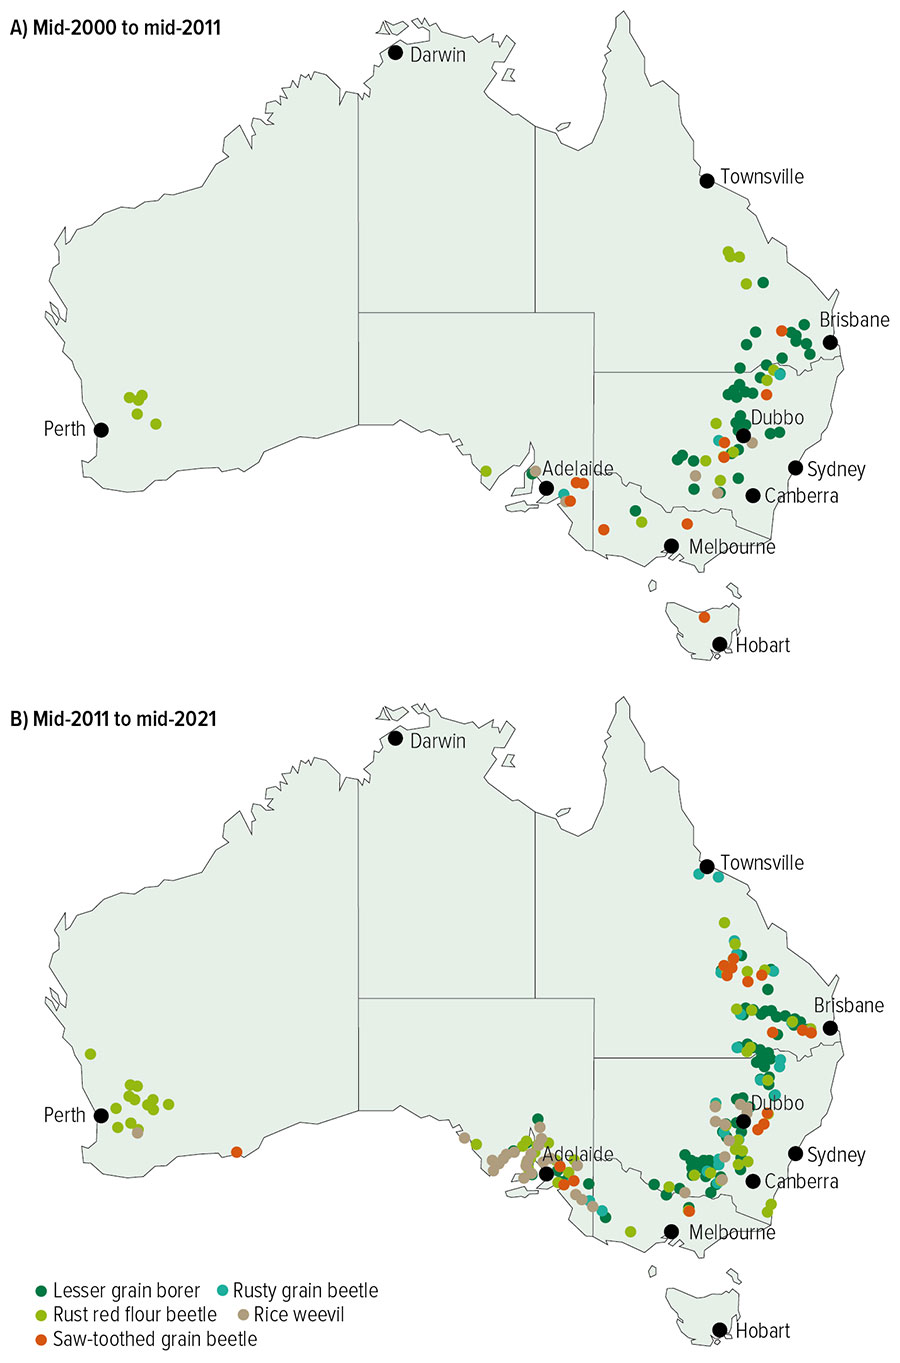 map of australia showing phosphine resistant insects